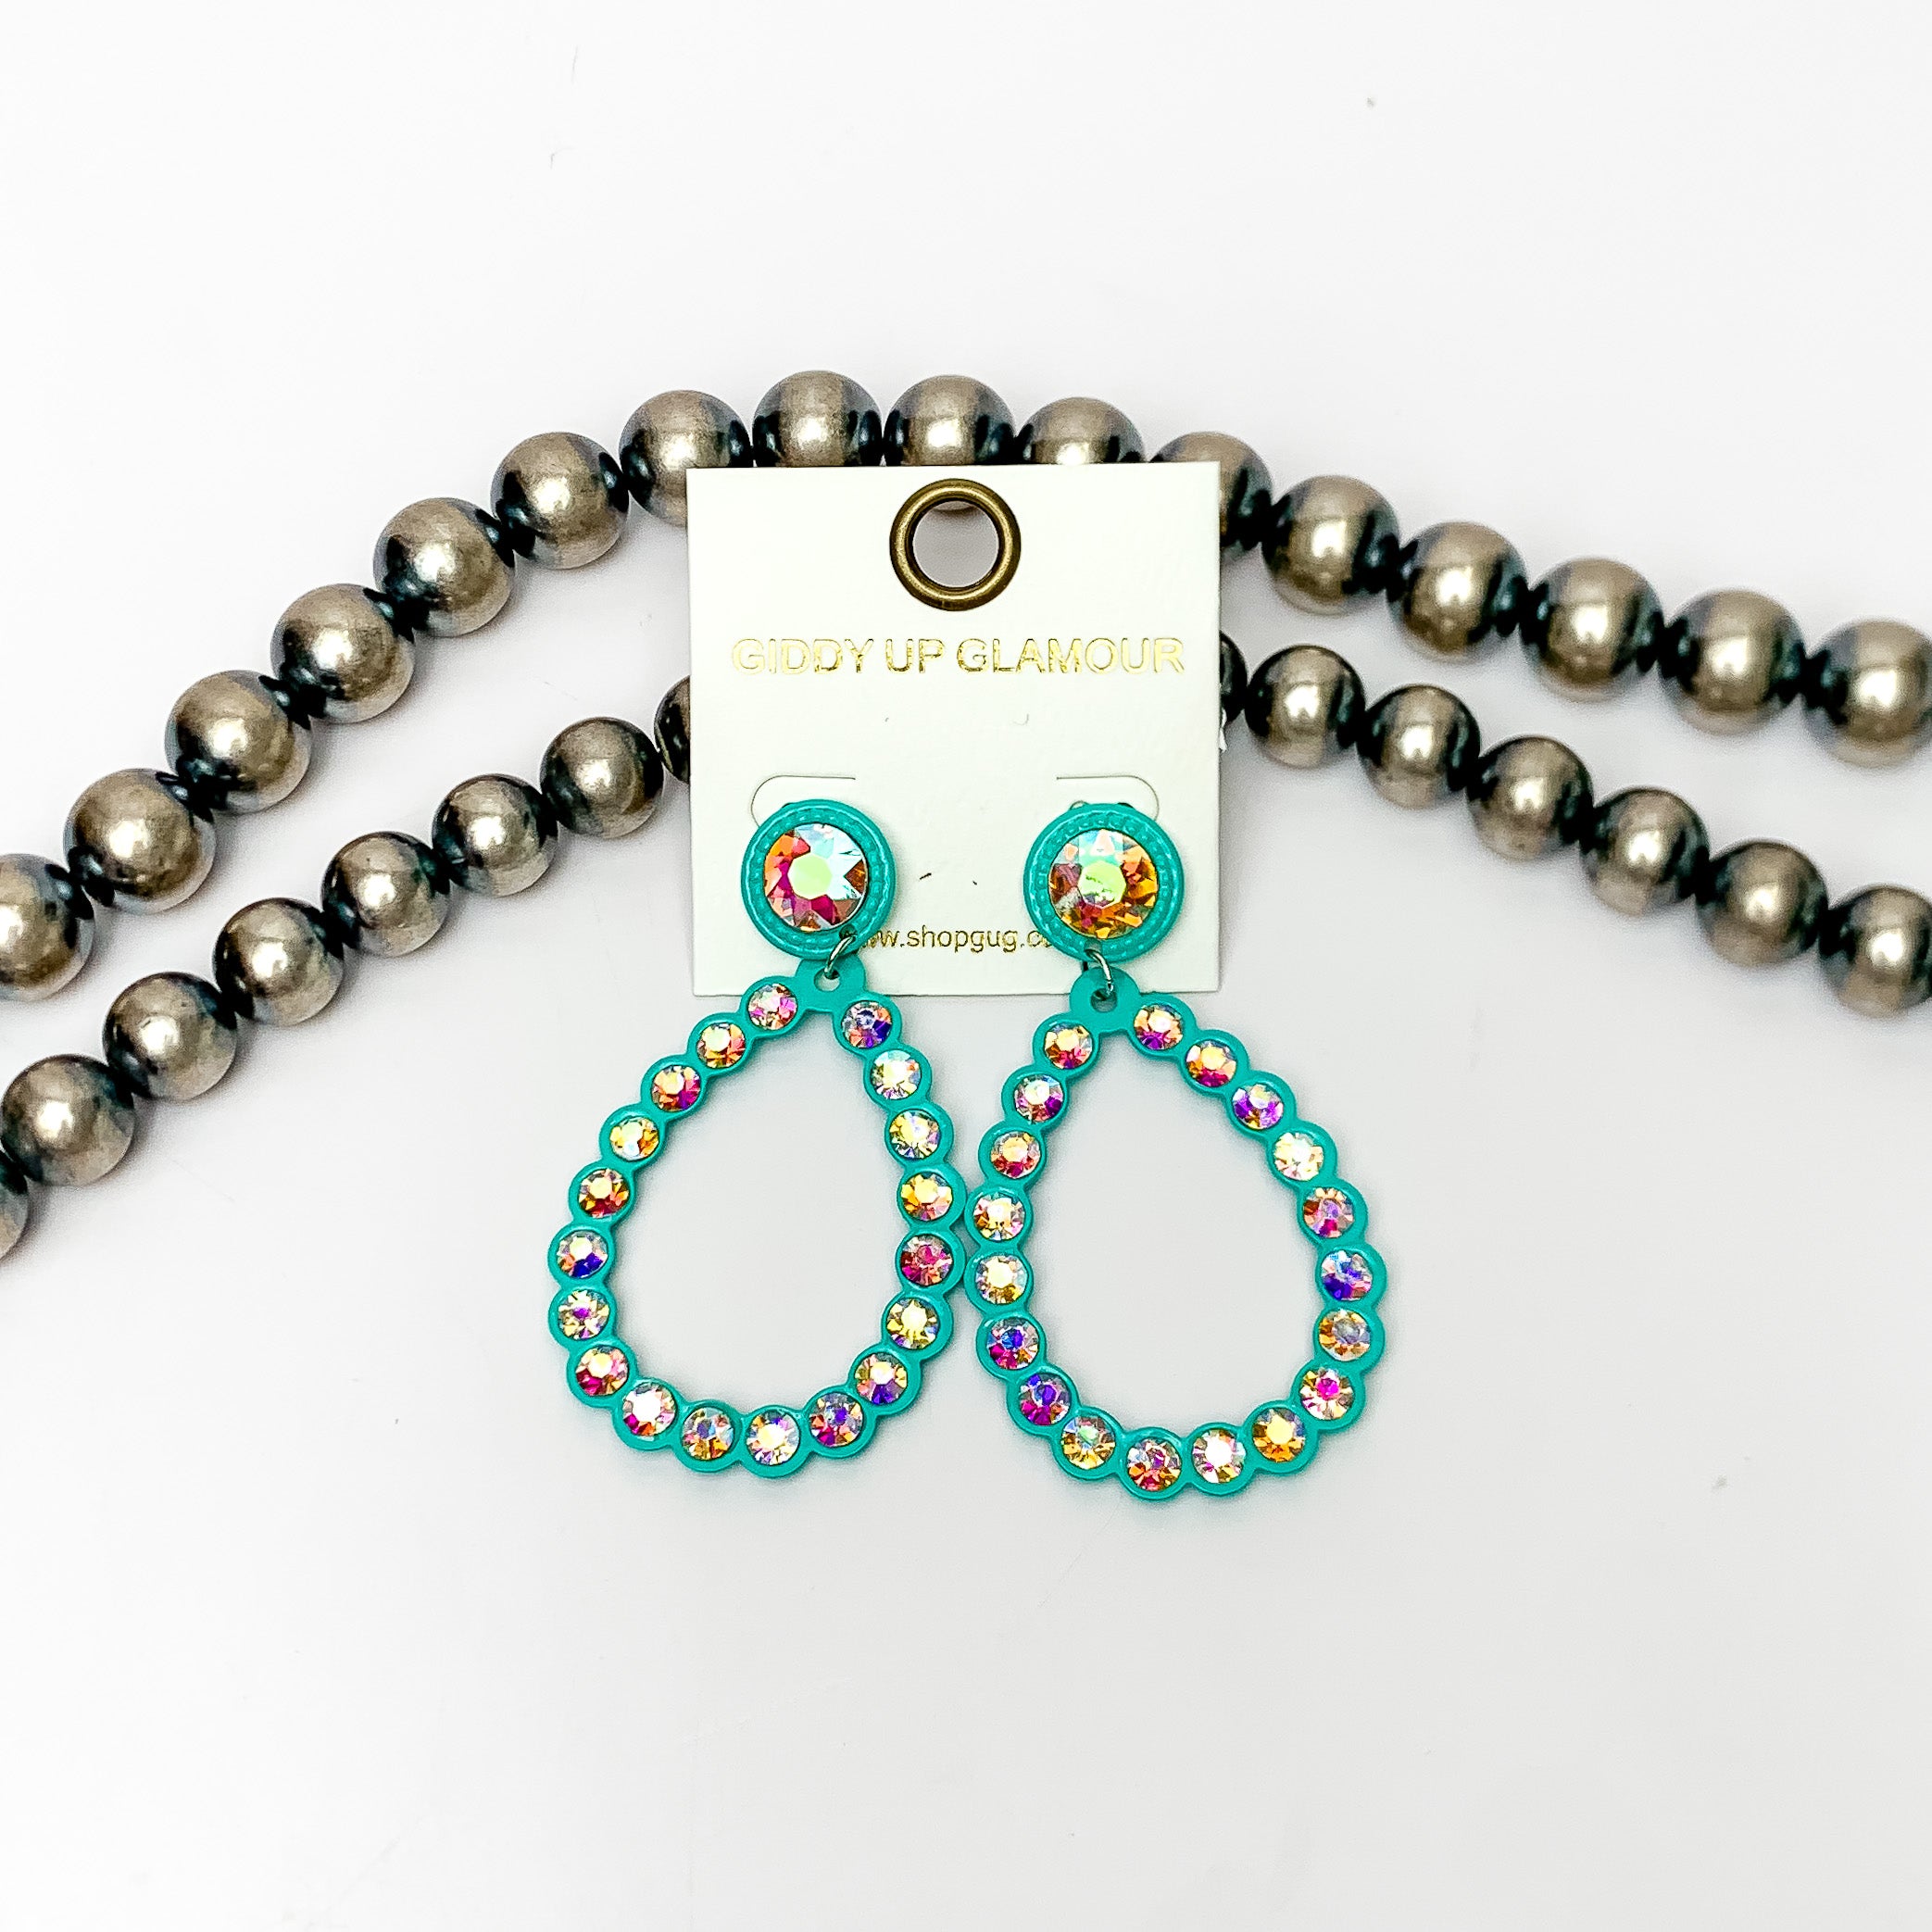 Glitzy Girl AB Crystal Teardrop Earrings in Turquoise. Pictured on a white background with Navajo pearls behind the earrings.